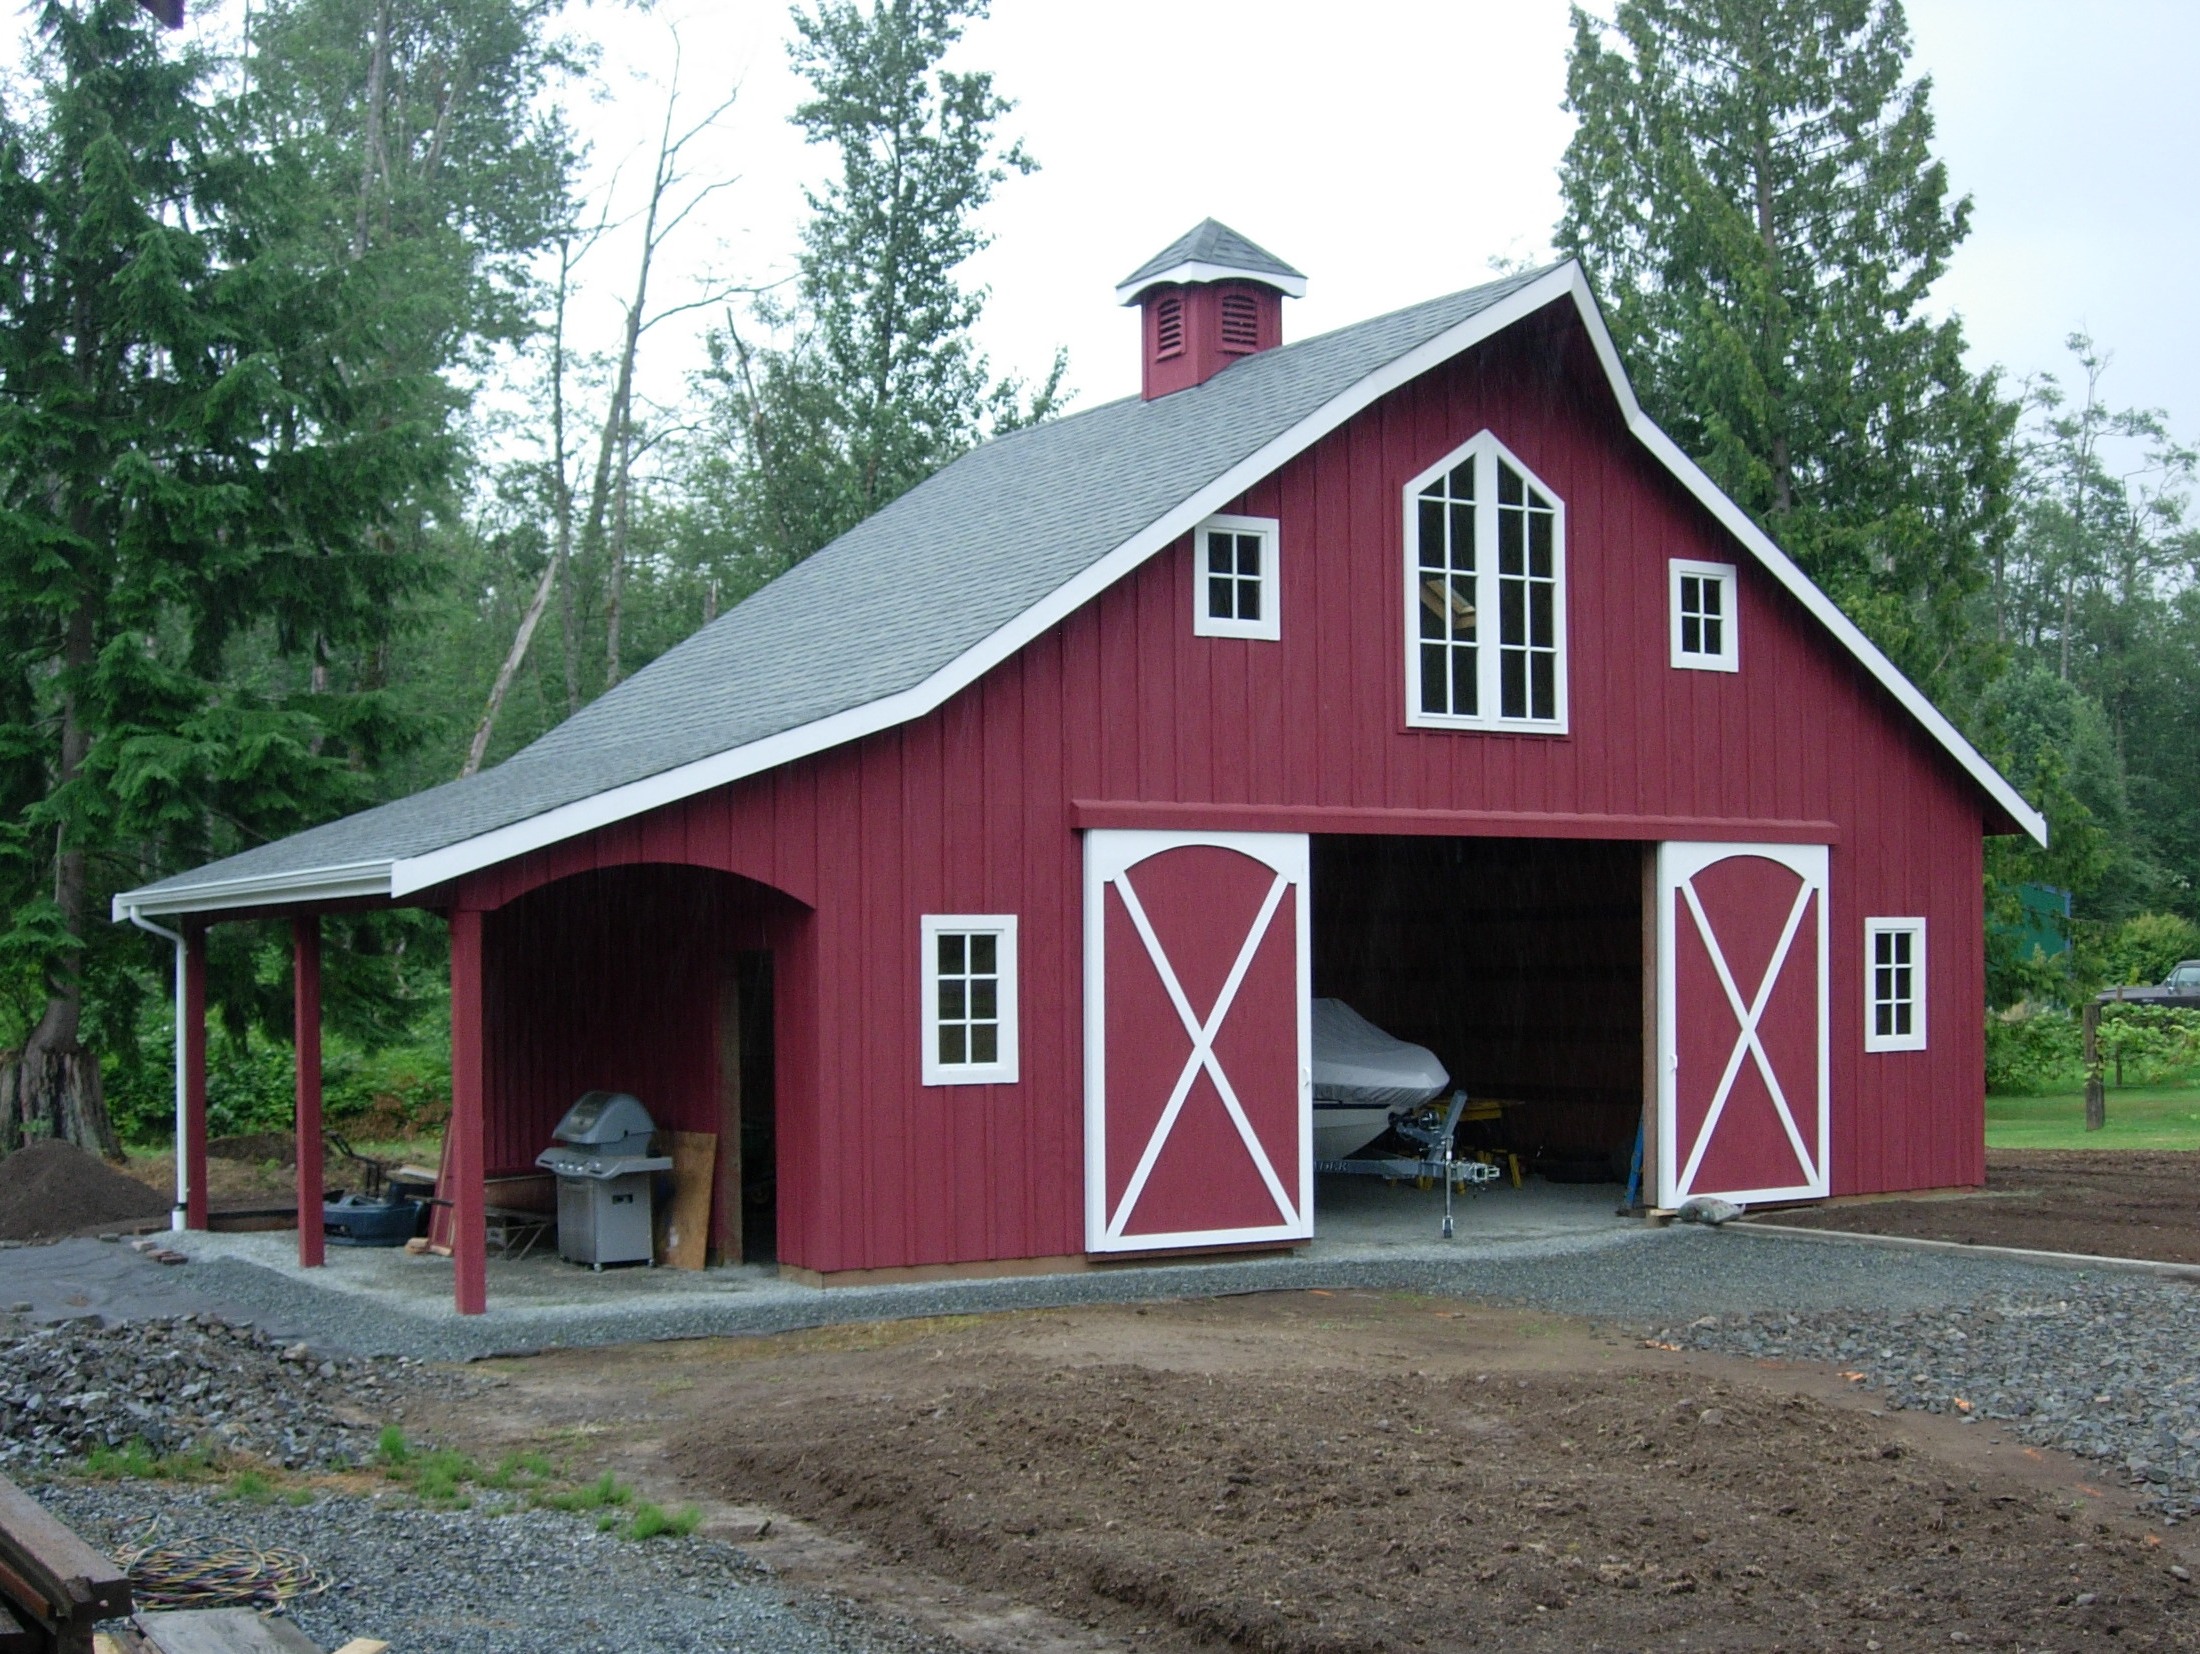 shed project: More Flat roof pole barn plans